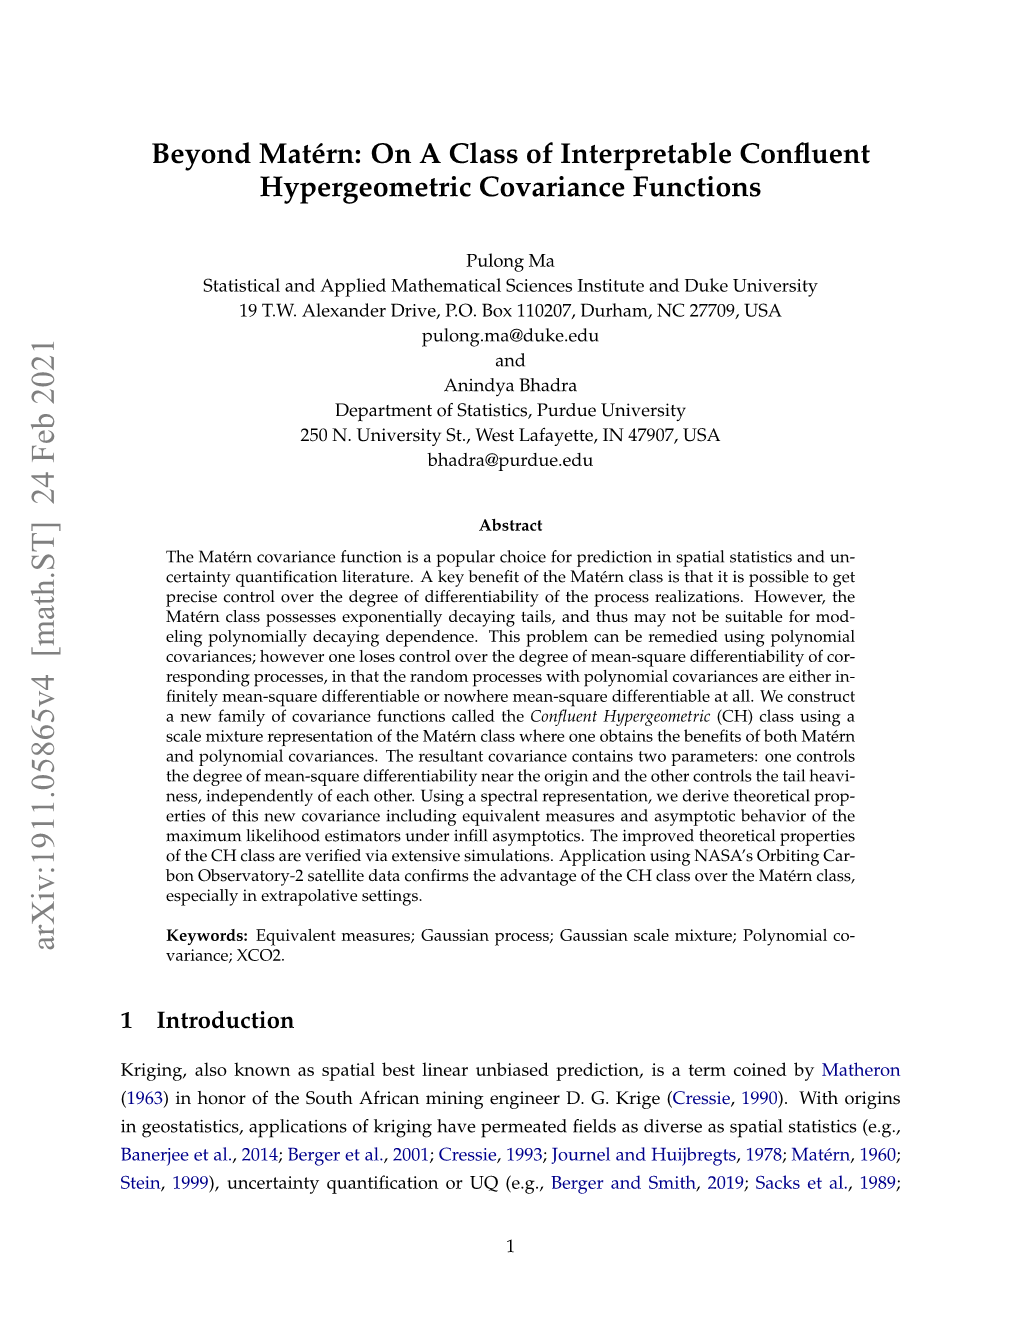 On a Class of Interpretable Confluent Hypergeometric Covariance